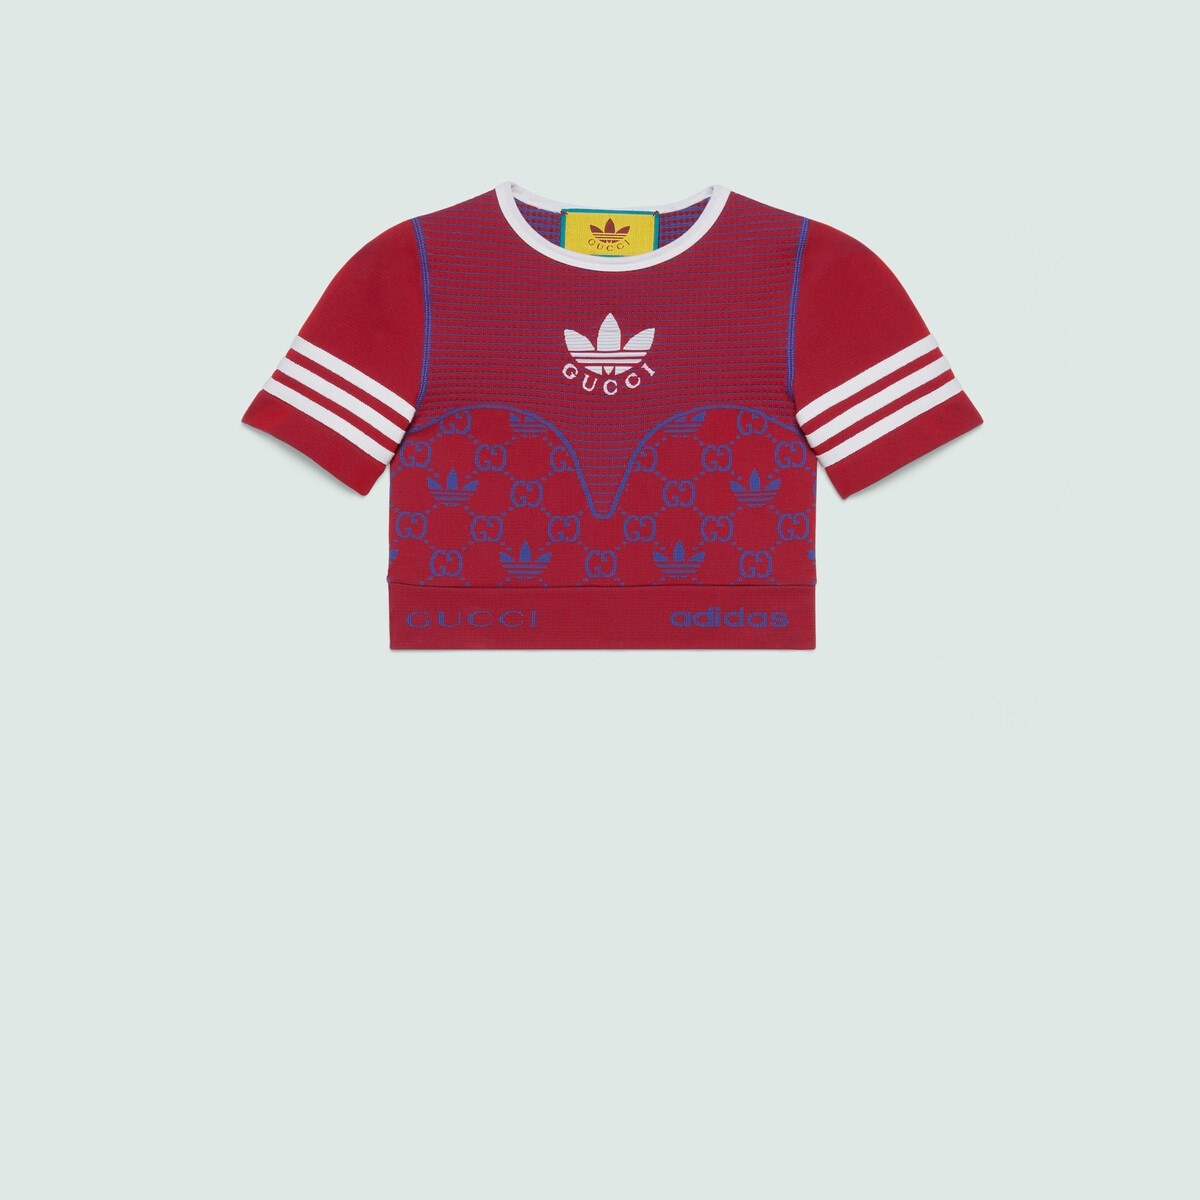 adidas x Gucci jersey cropped top - 1